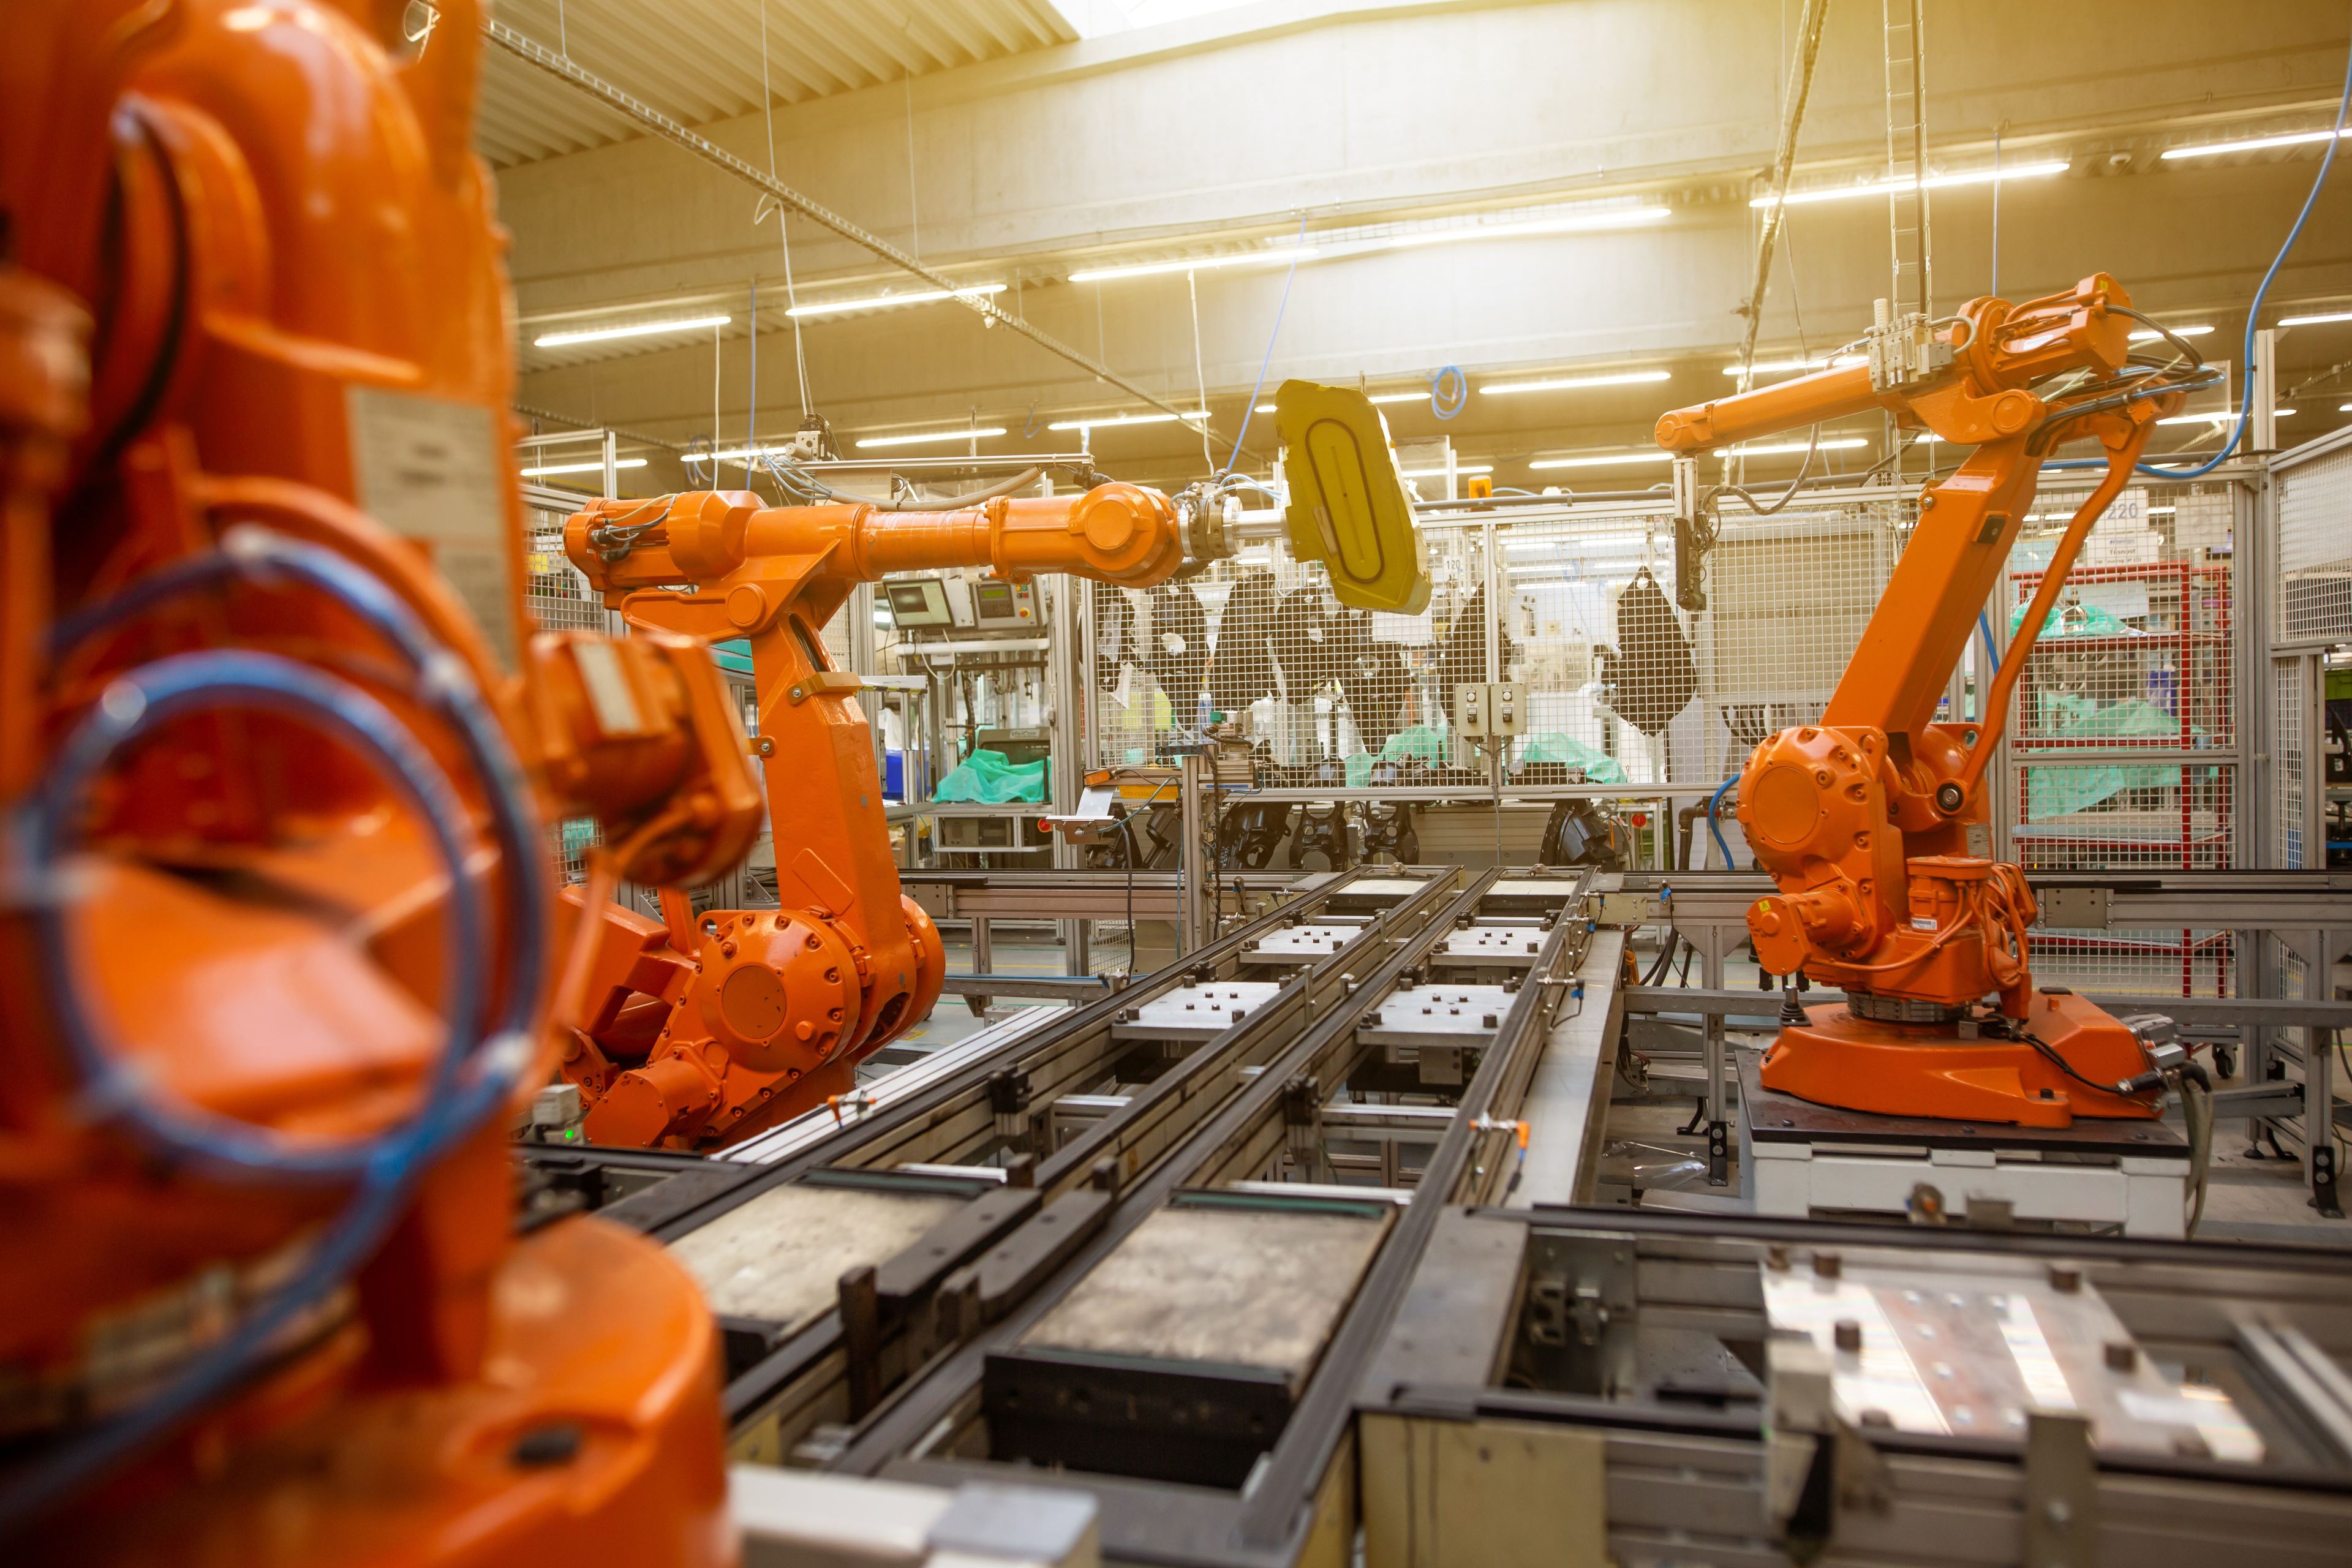 Robotics: Accelerate your path to compliance when designing and developing cutting edge robotics.